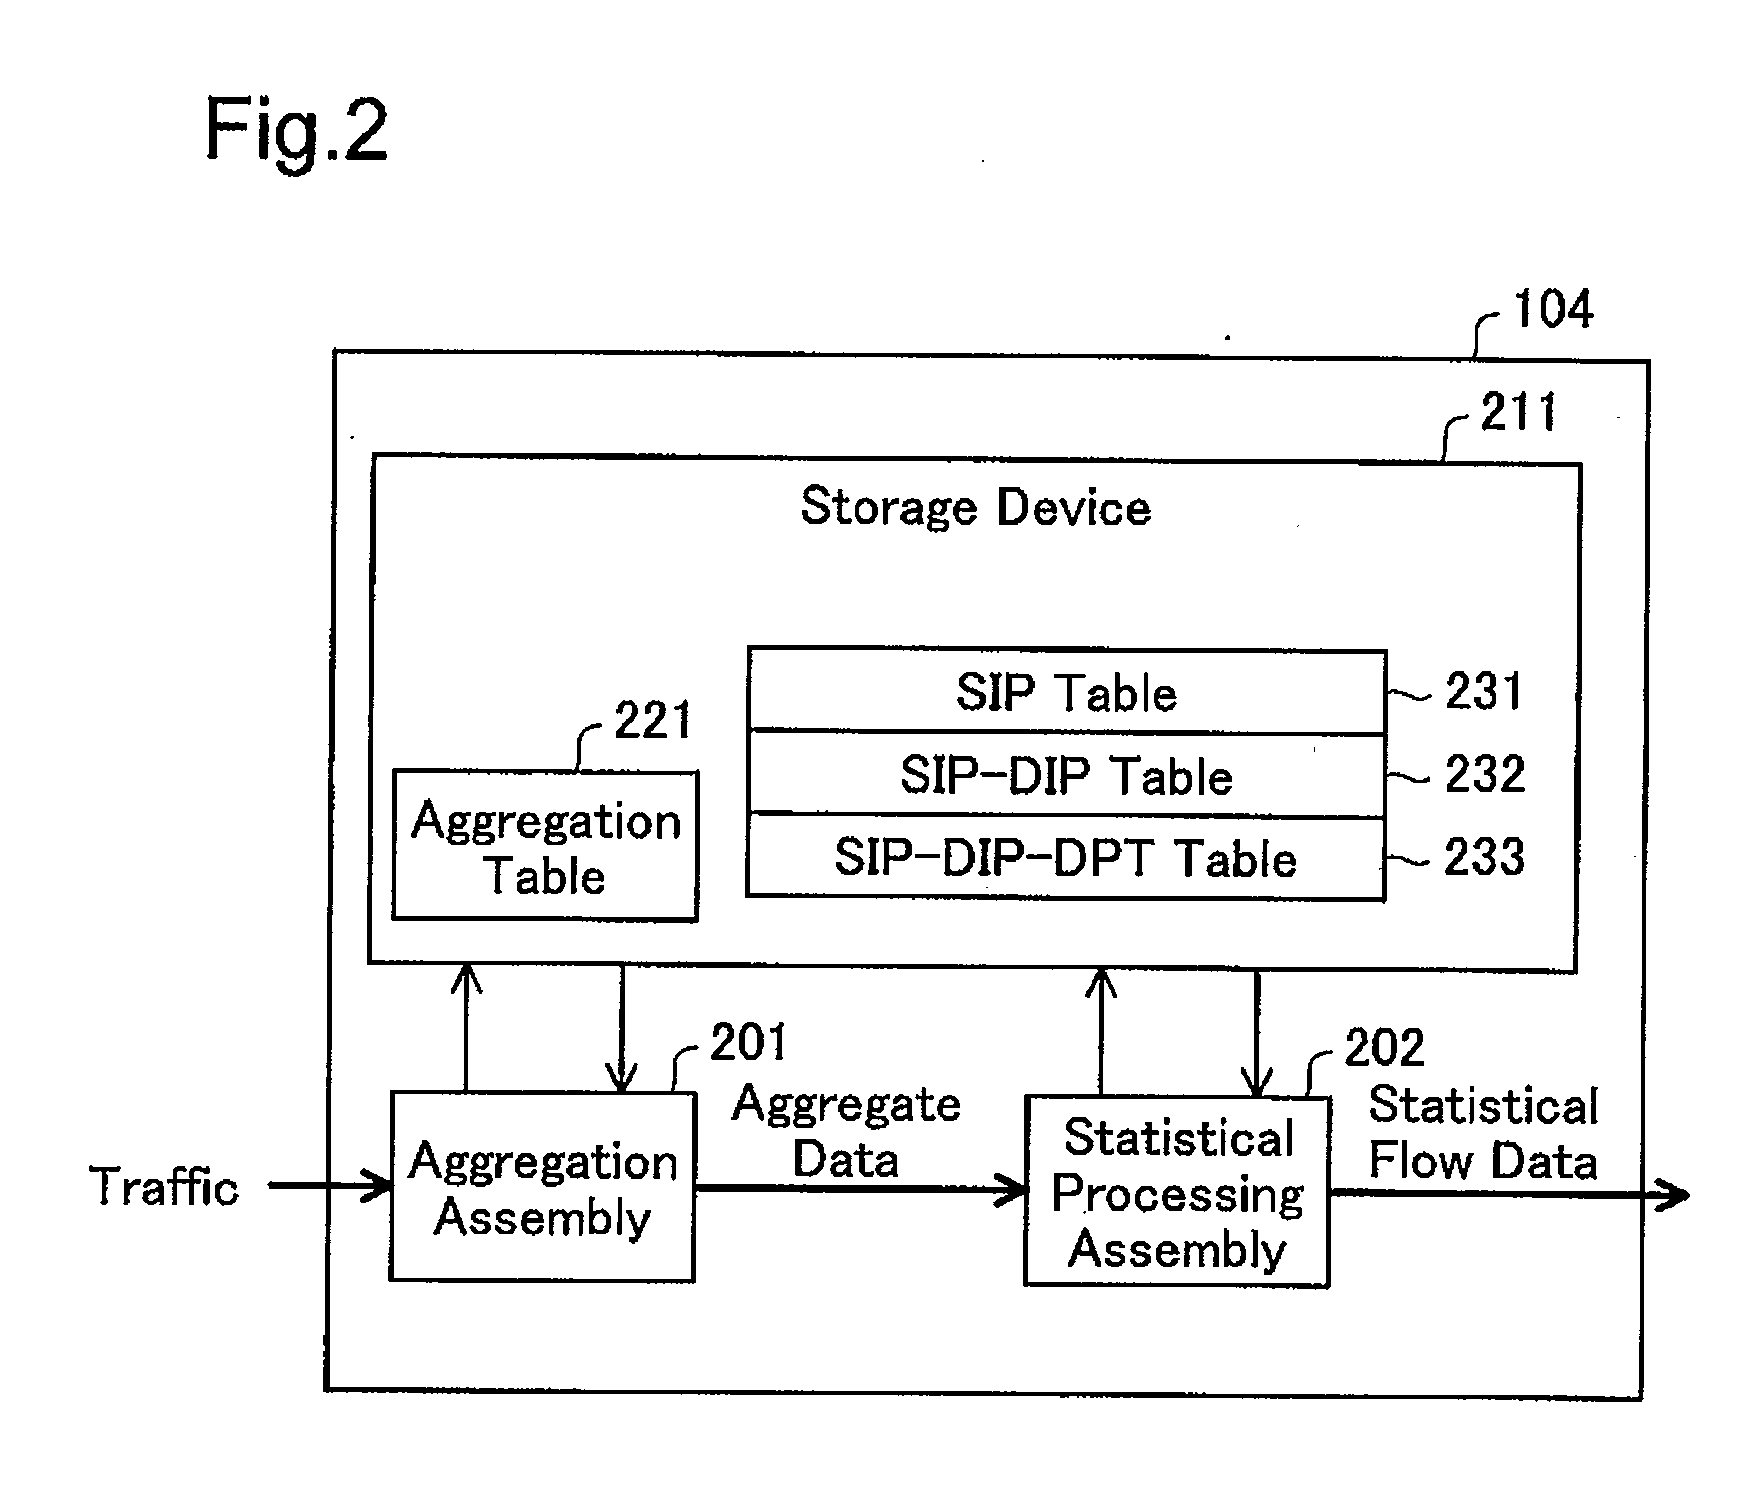 Communication data statistical apparatus, communication data statistical method, and computer program product